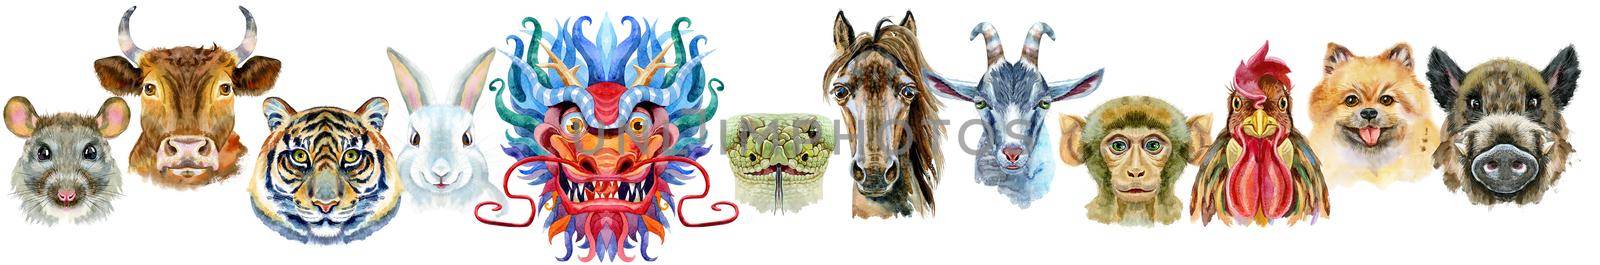 Border from watercolor twelve chinese zodiac animals by NataOmsk